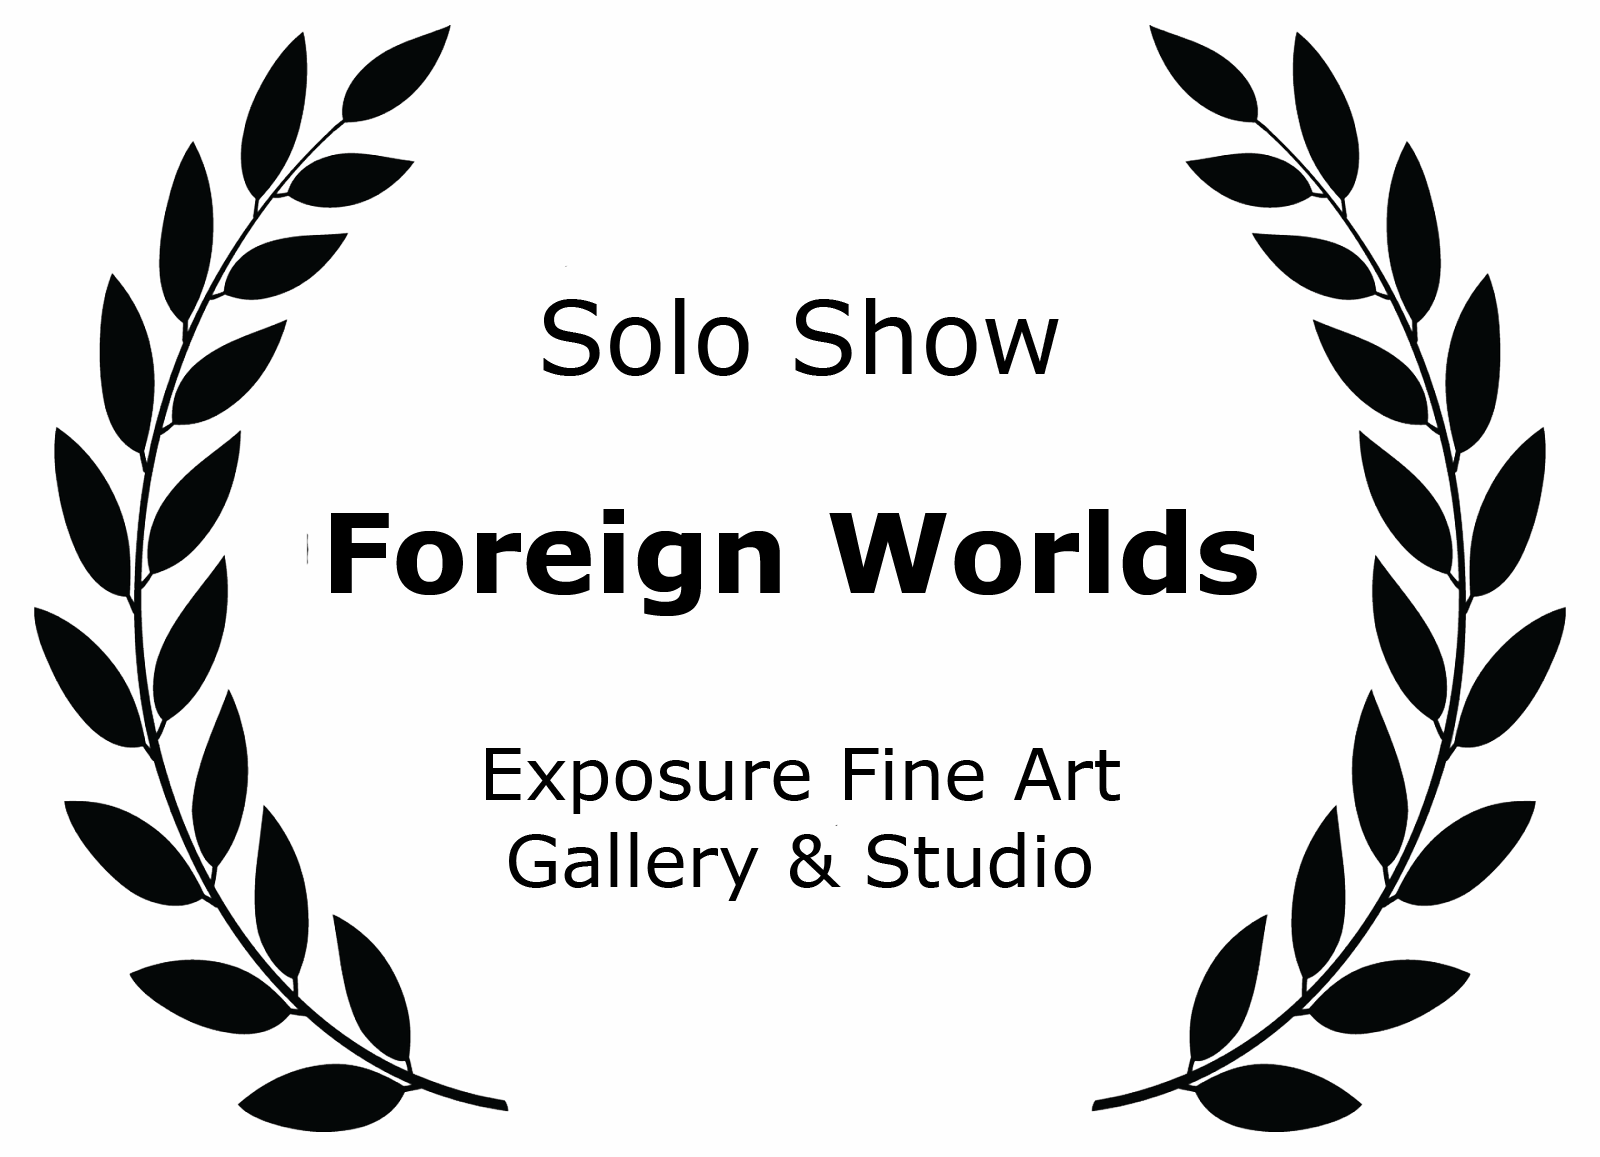 Solo Show Foreign Worlds Exposure Fine Art Gallery & Studio